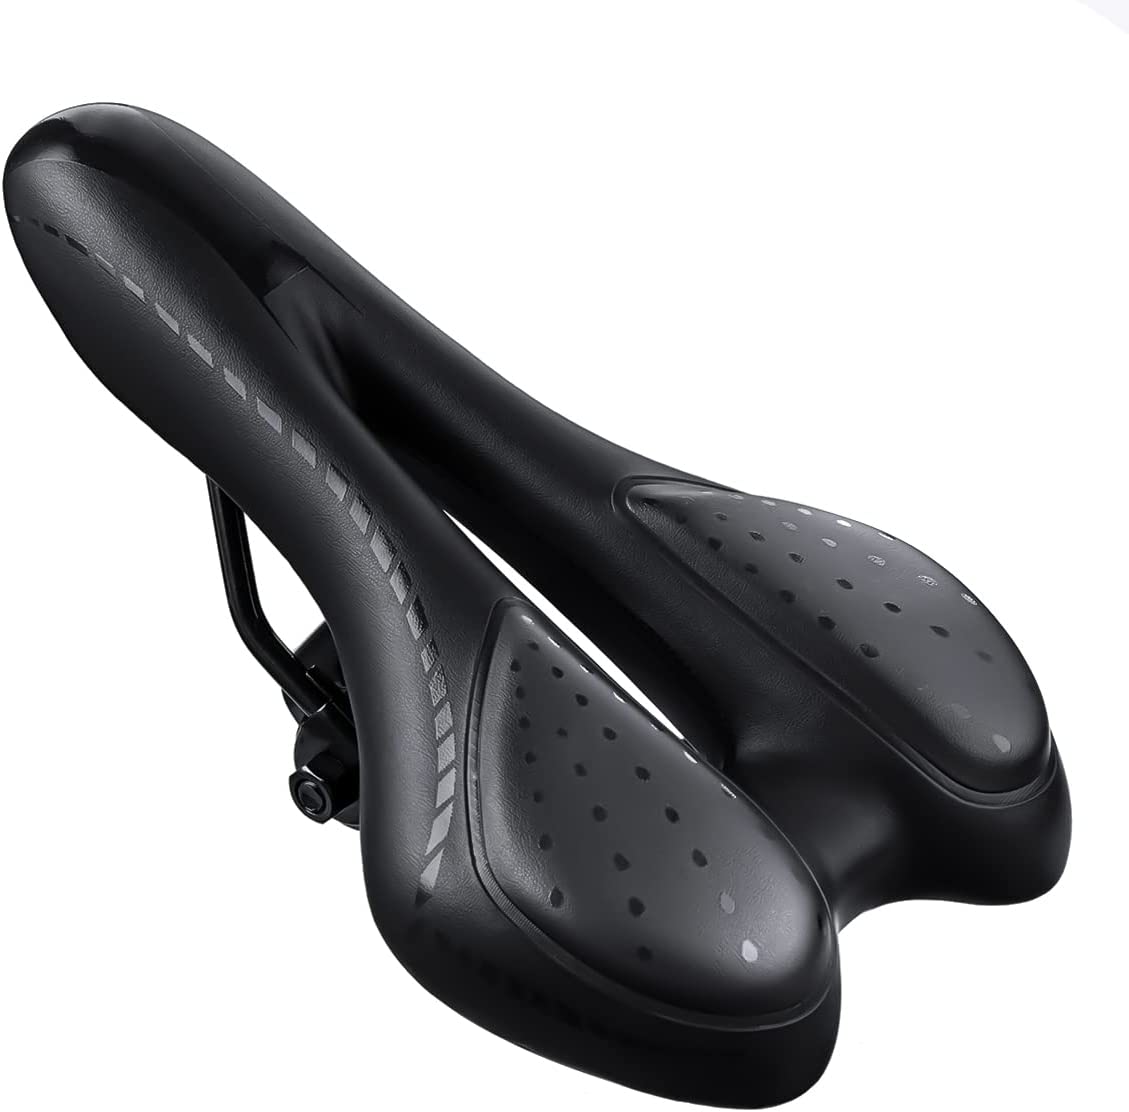 An ideal material for a mountain bike saddle padding is gel because it molds to the shape of your body.